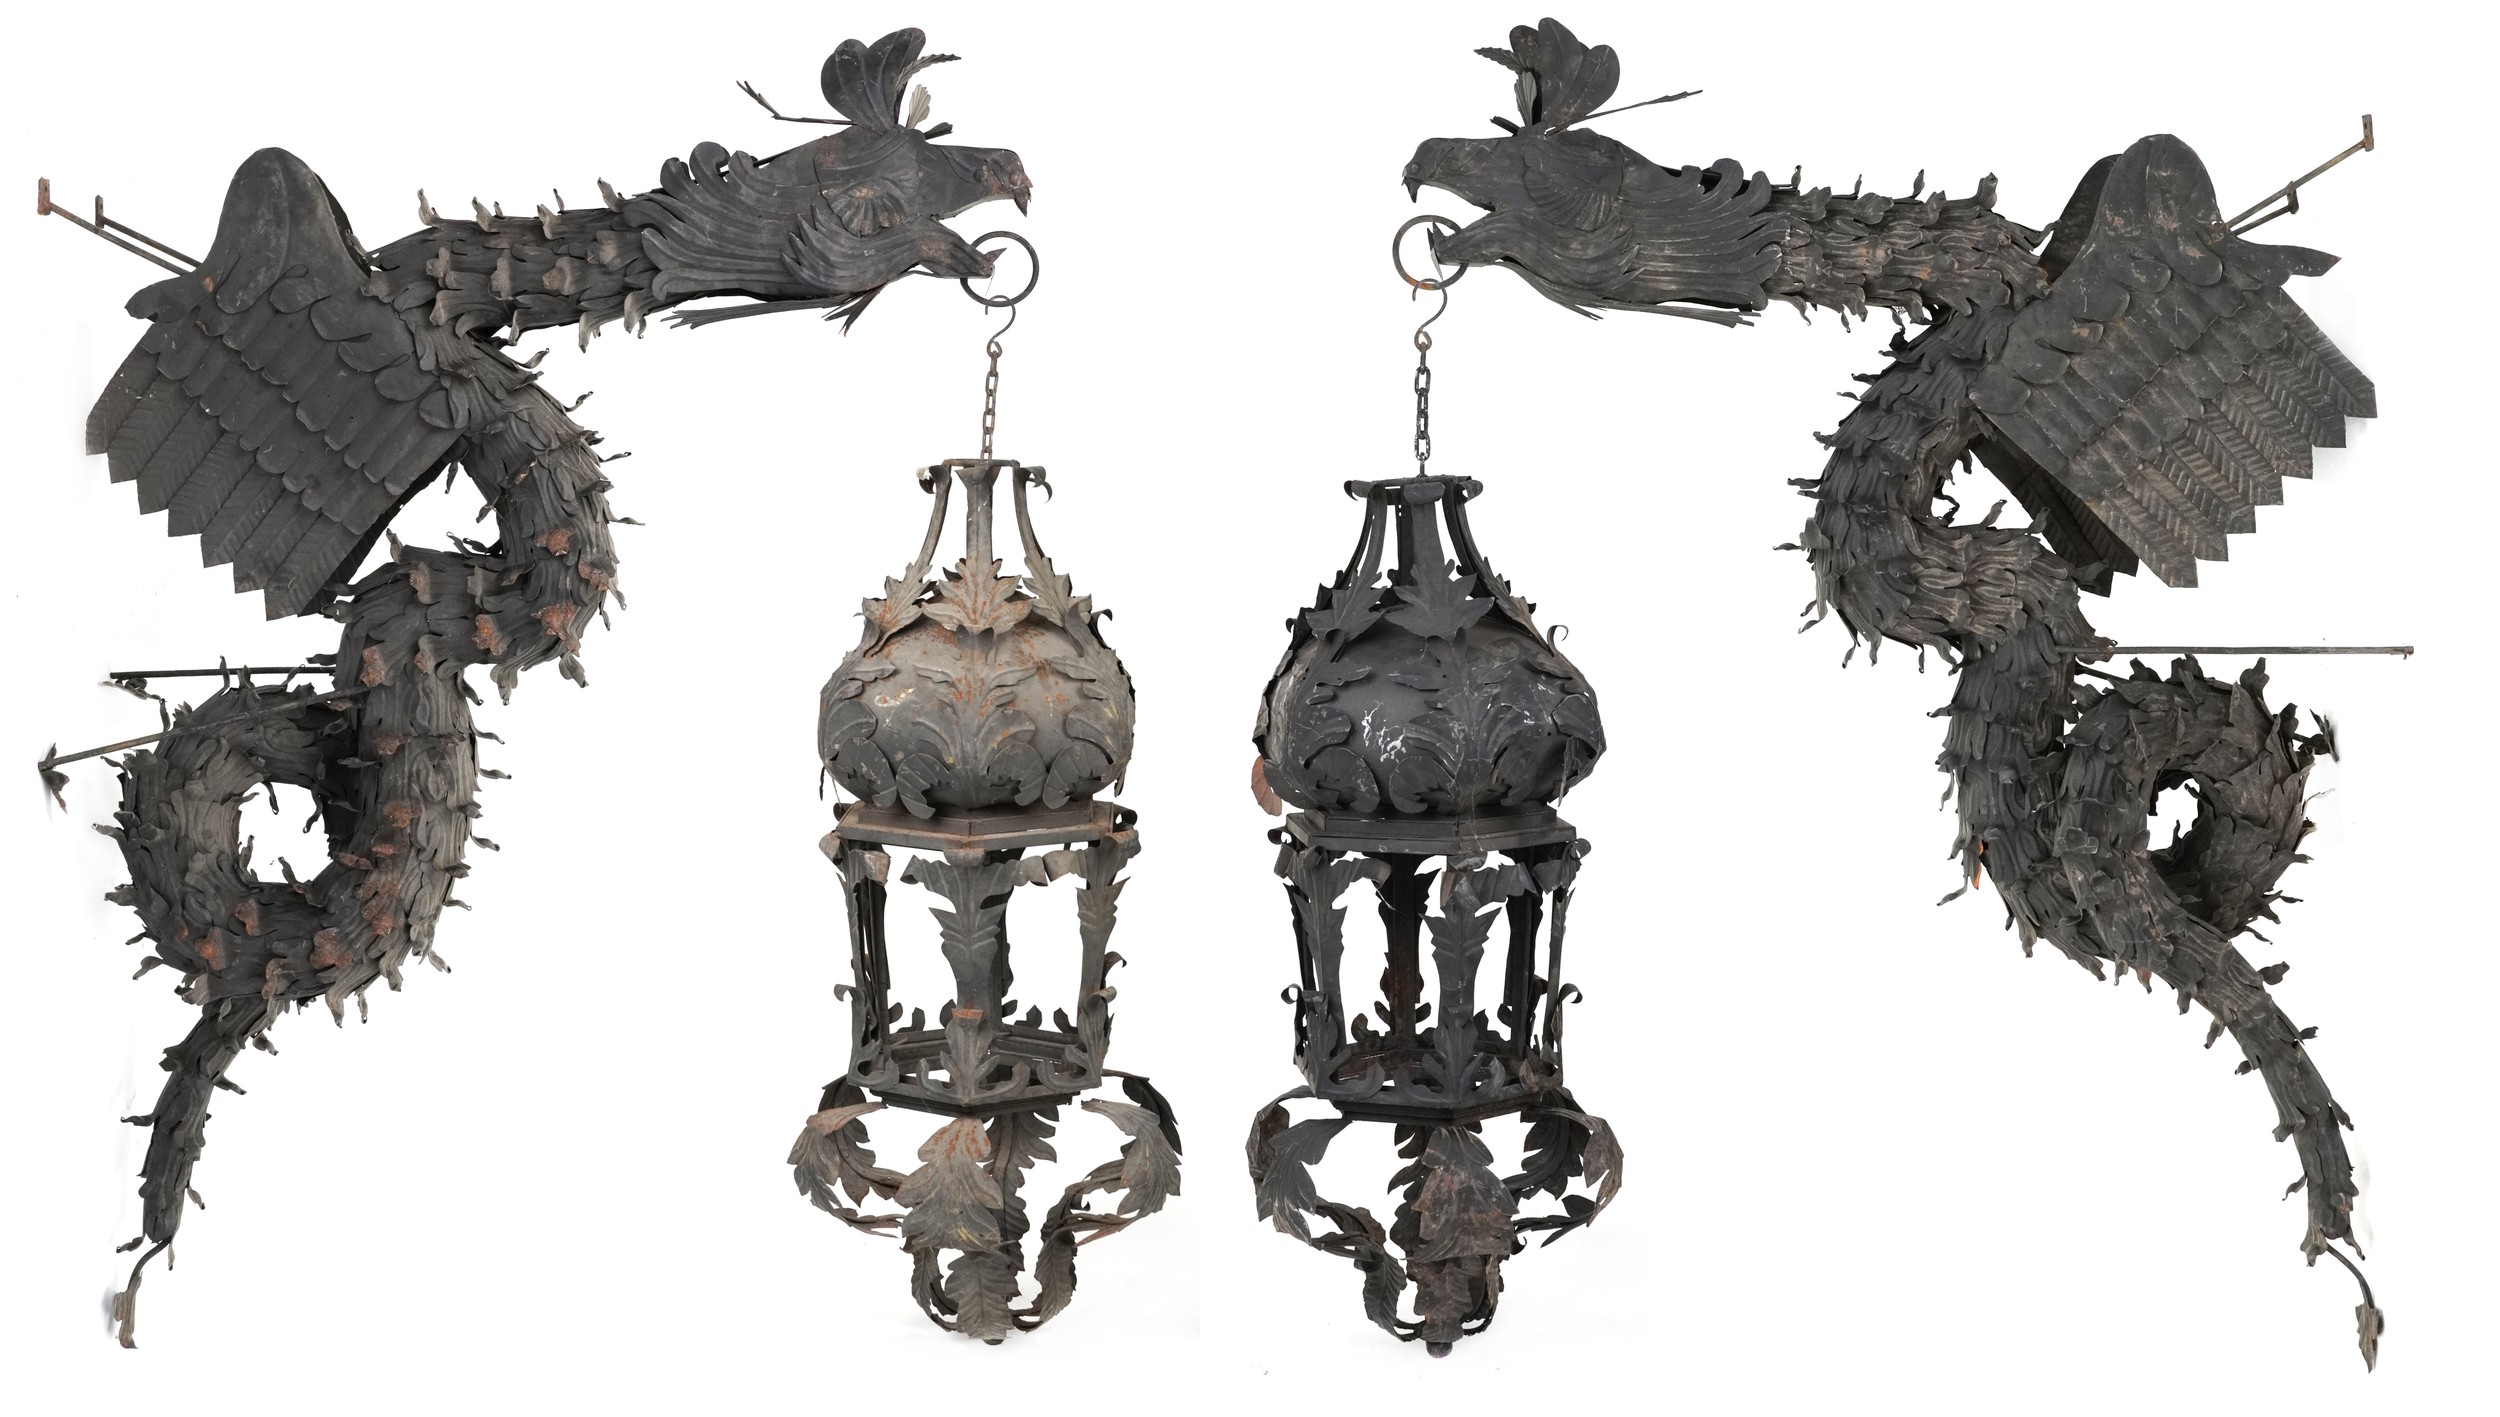 Pair of Chinese iron dragon wall lantern wall sculptures, each dragon 200cm in length